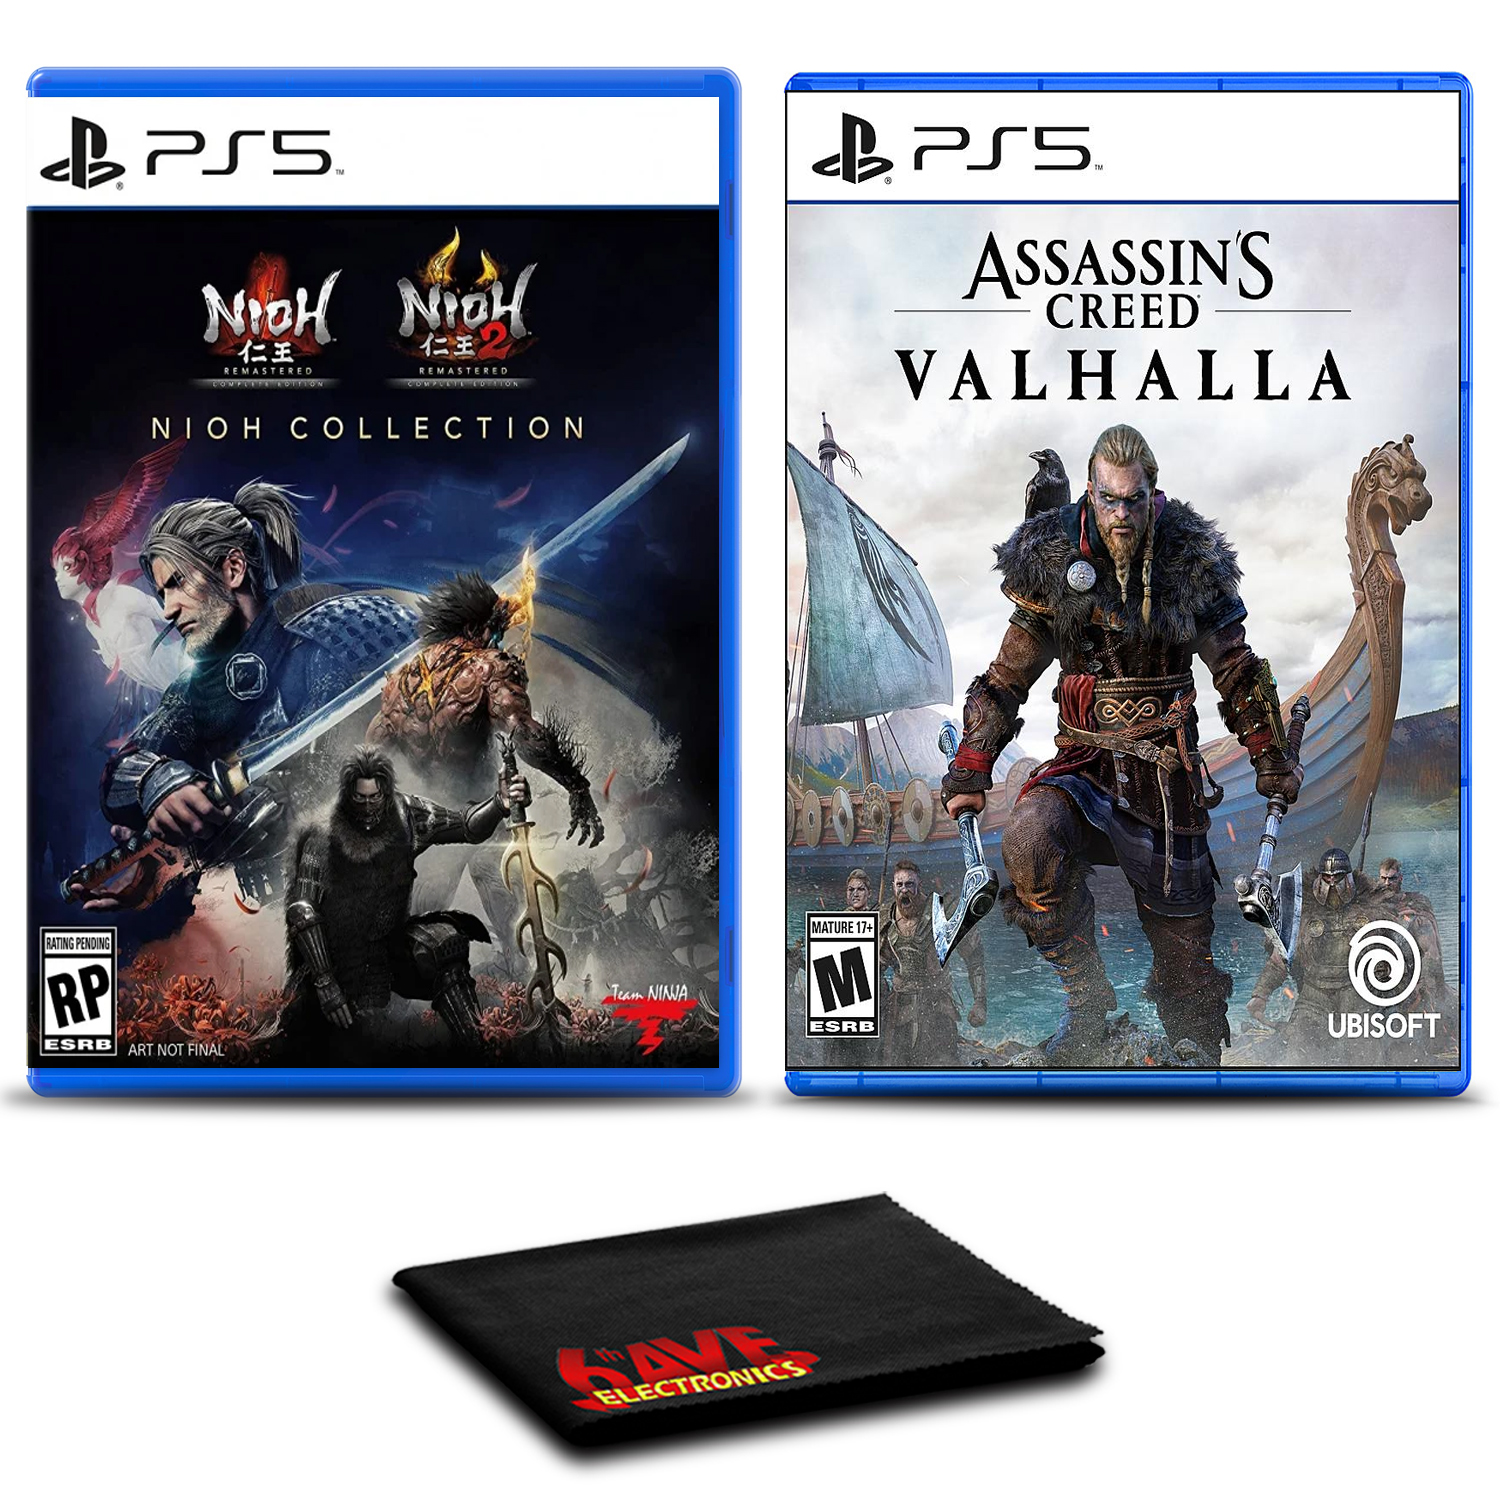 The Nioh Collection and Assassins Creed Valhalla - Two Games For PS5 